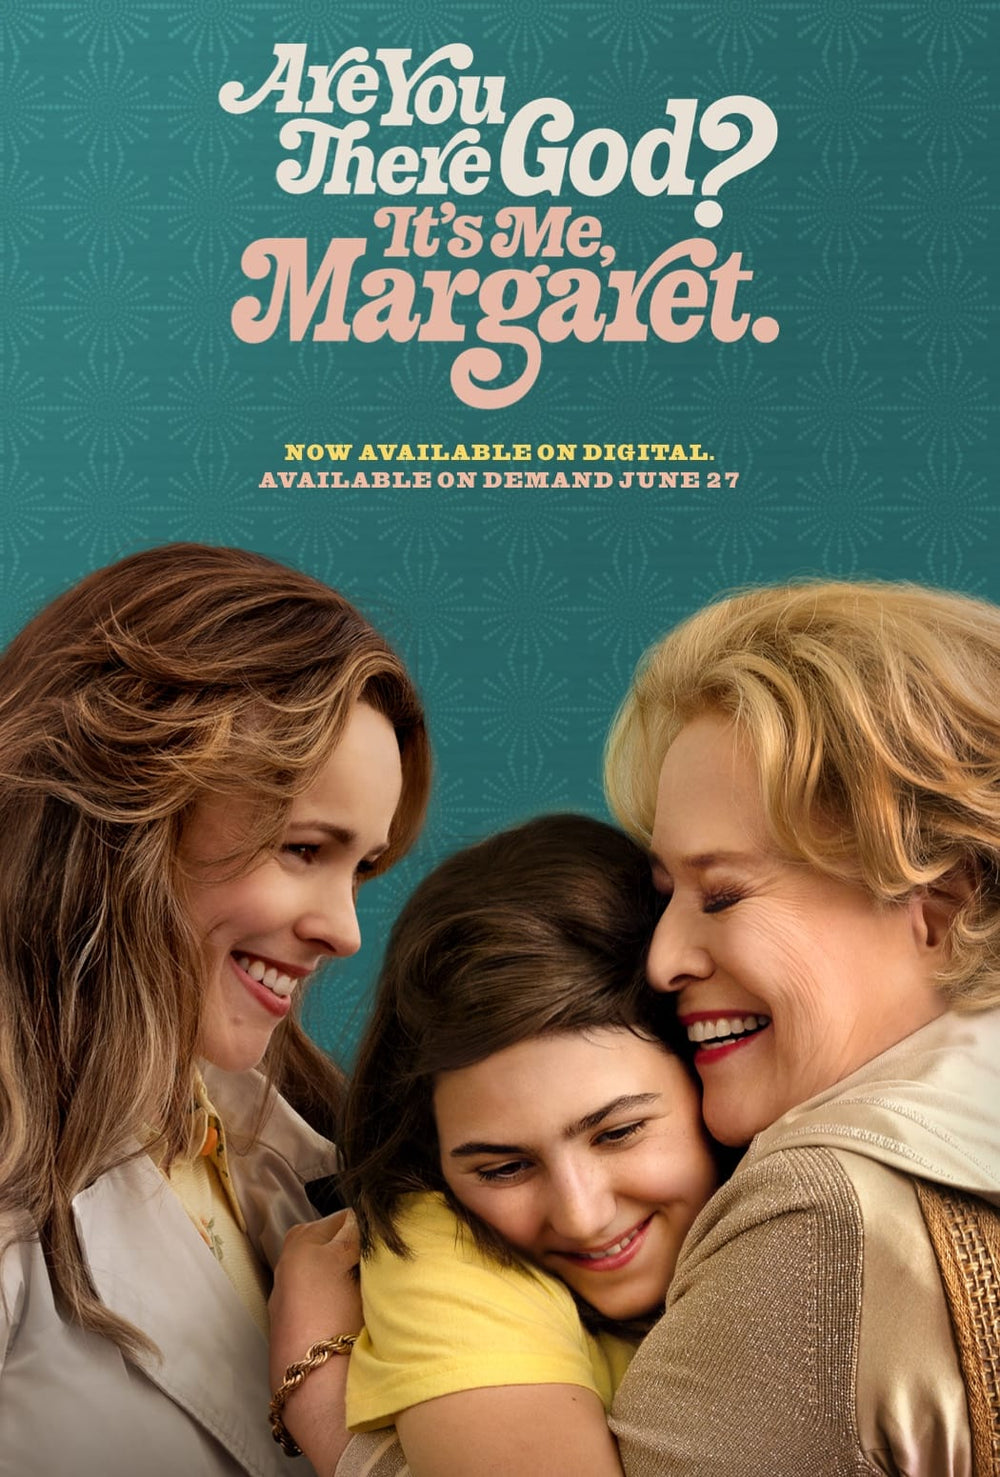 Are You There God? It's Me, Margaret HD VUDU Via Movieredeem.com